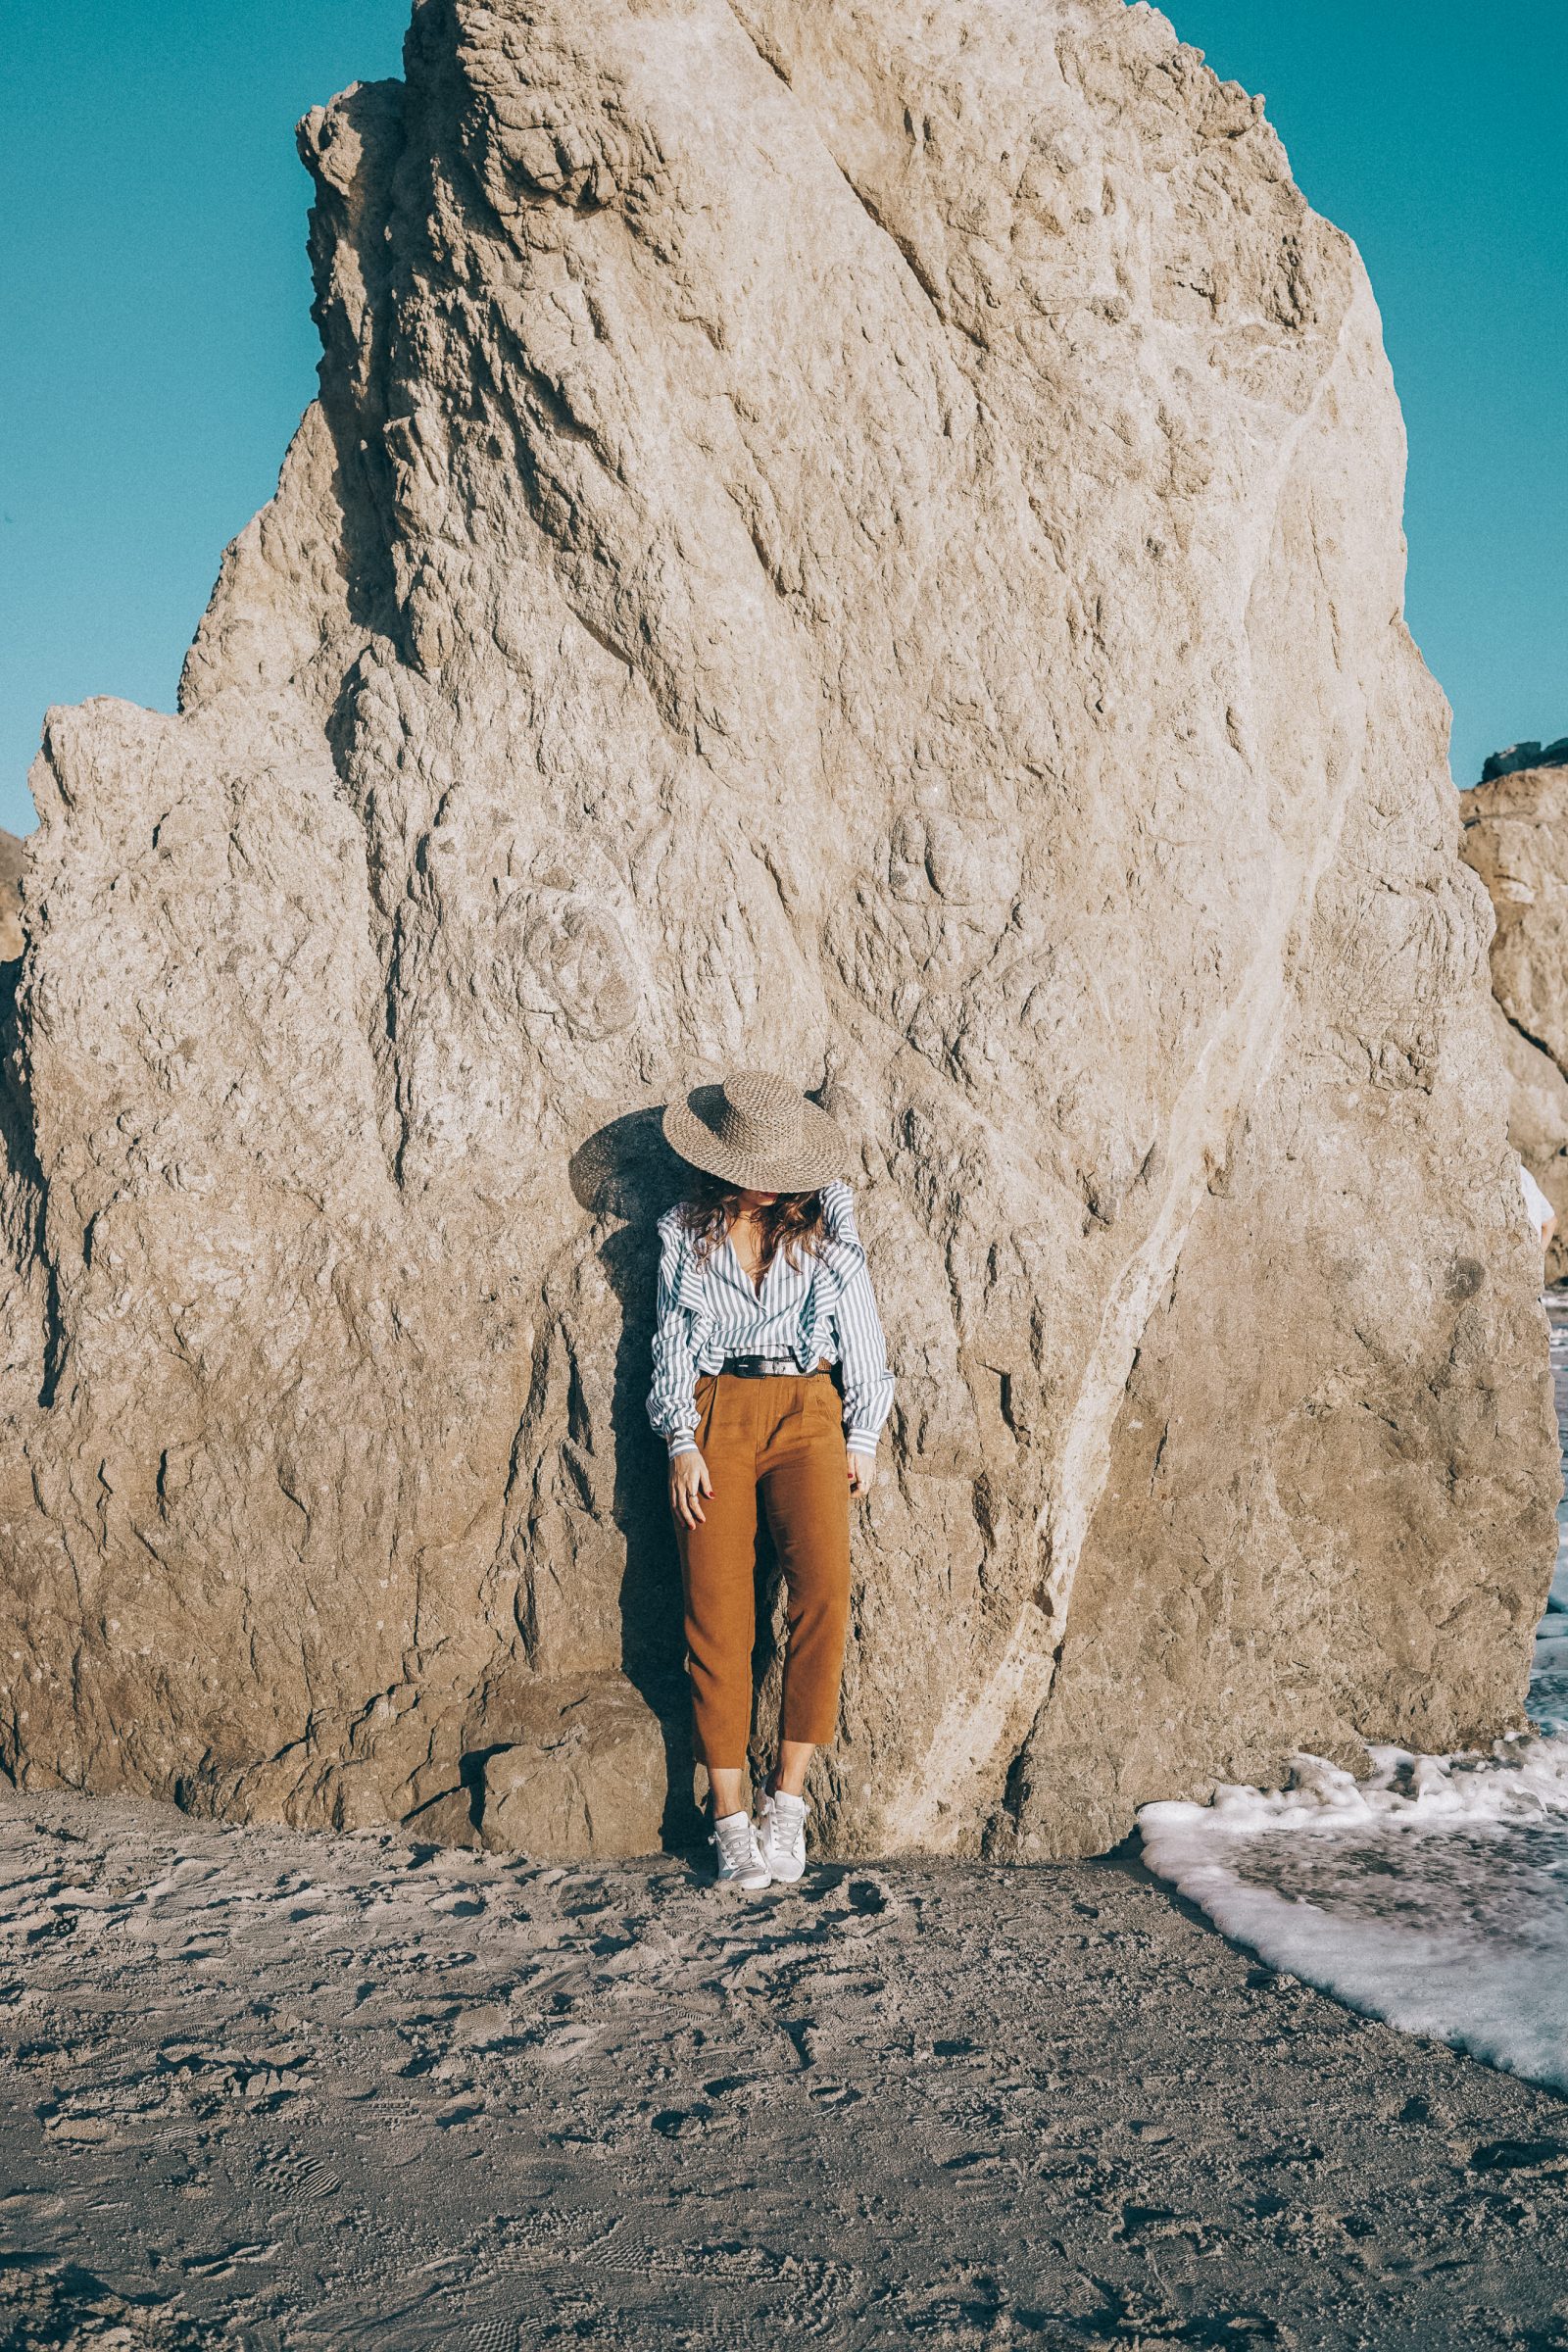 stripped_blouse-camel_trousers-lack_of_color_hat-wanderlust_jewels-matador_beach-malibu-golden_goose_sneakers-street_style-collage_vintage-117